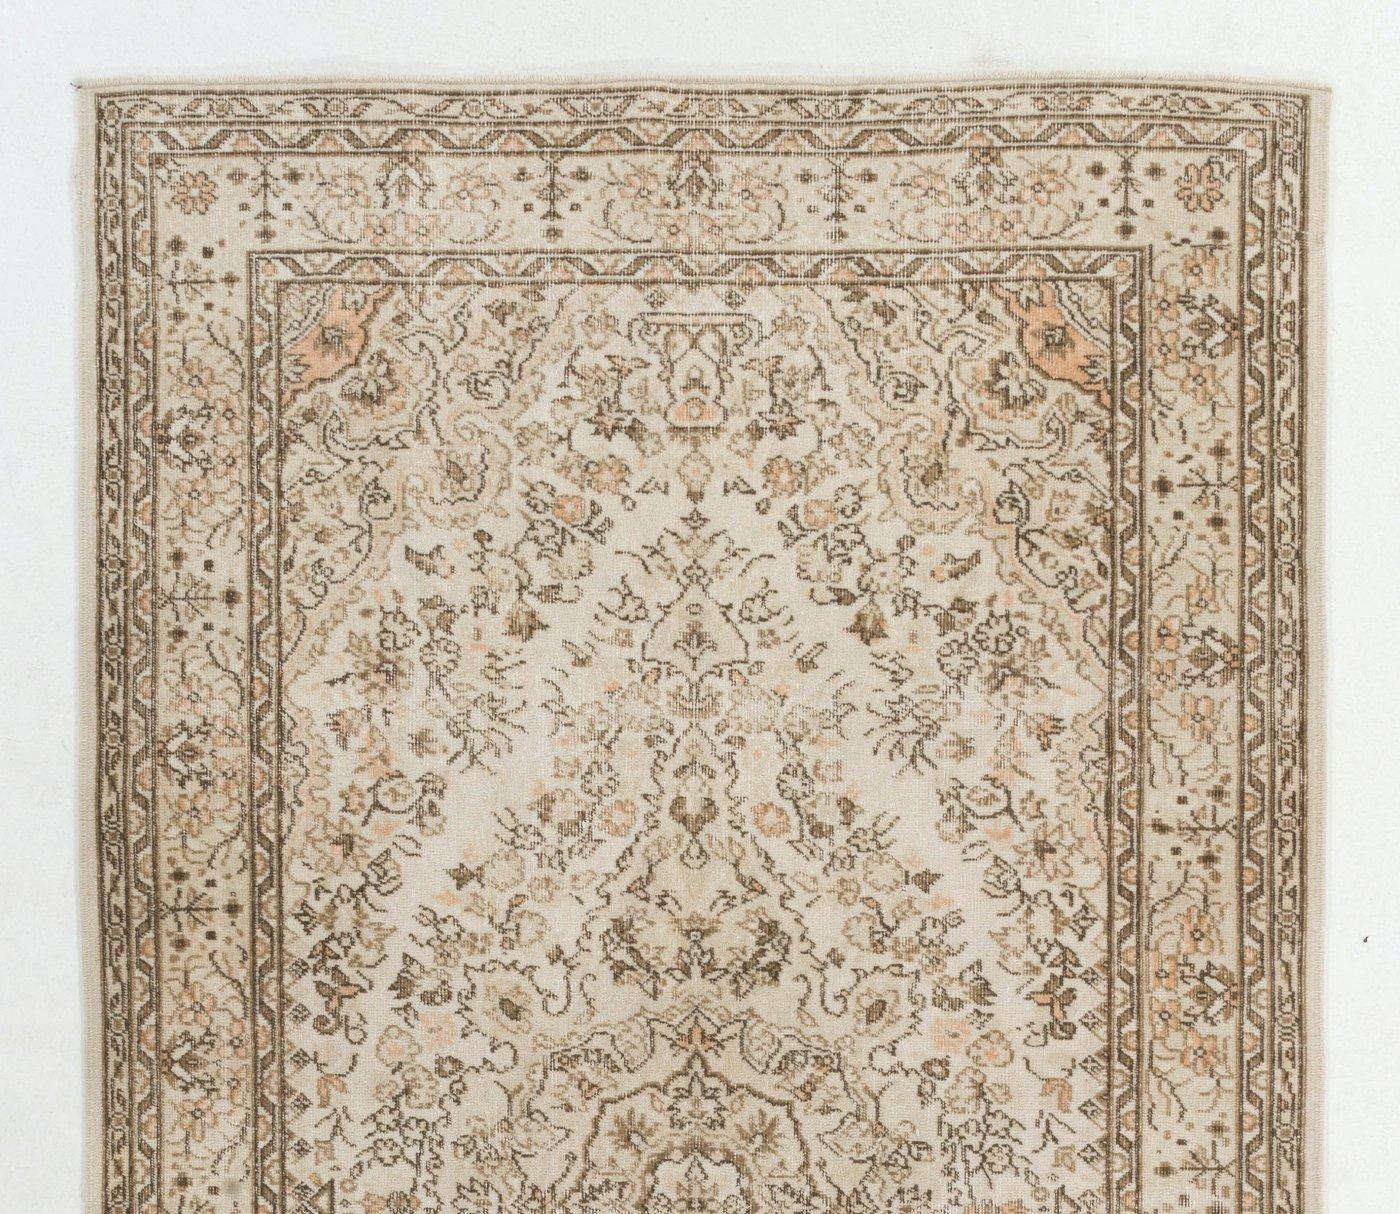 Vintage Turkish area rug hand-knotted in the 1960s with Finely hand-knotted with low wool pile on cotton foundation. The rug has an intricate floral design with a medallion at the center, in soft peach and swamp mud green against an ivory field. It